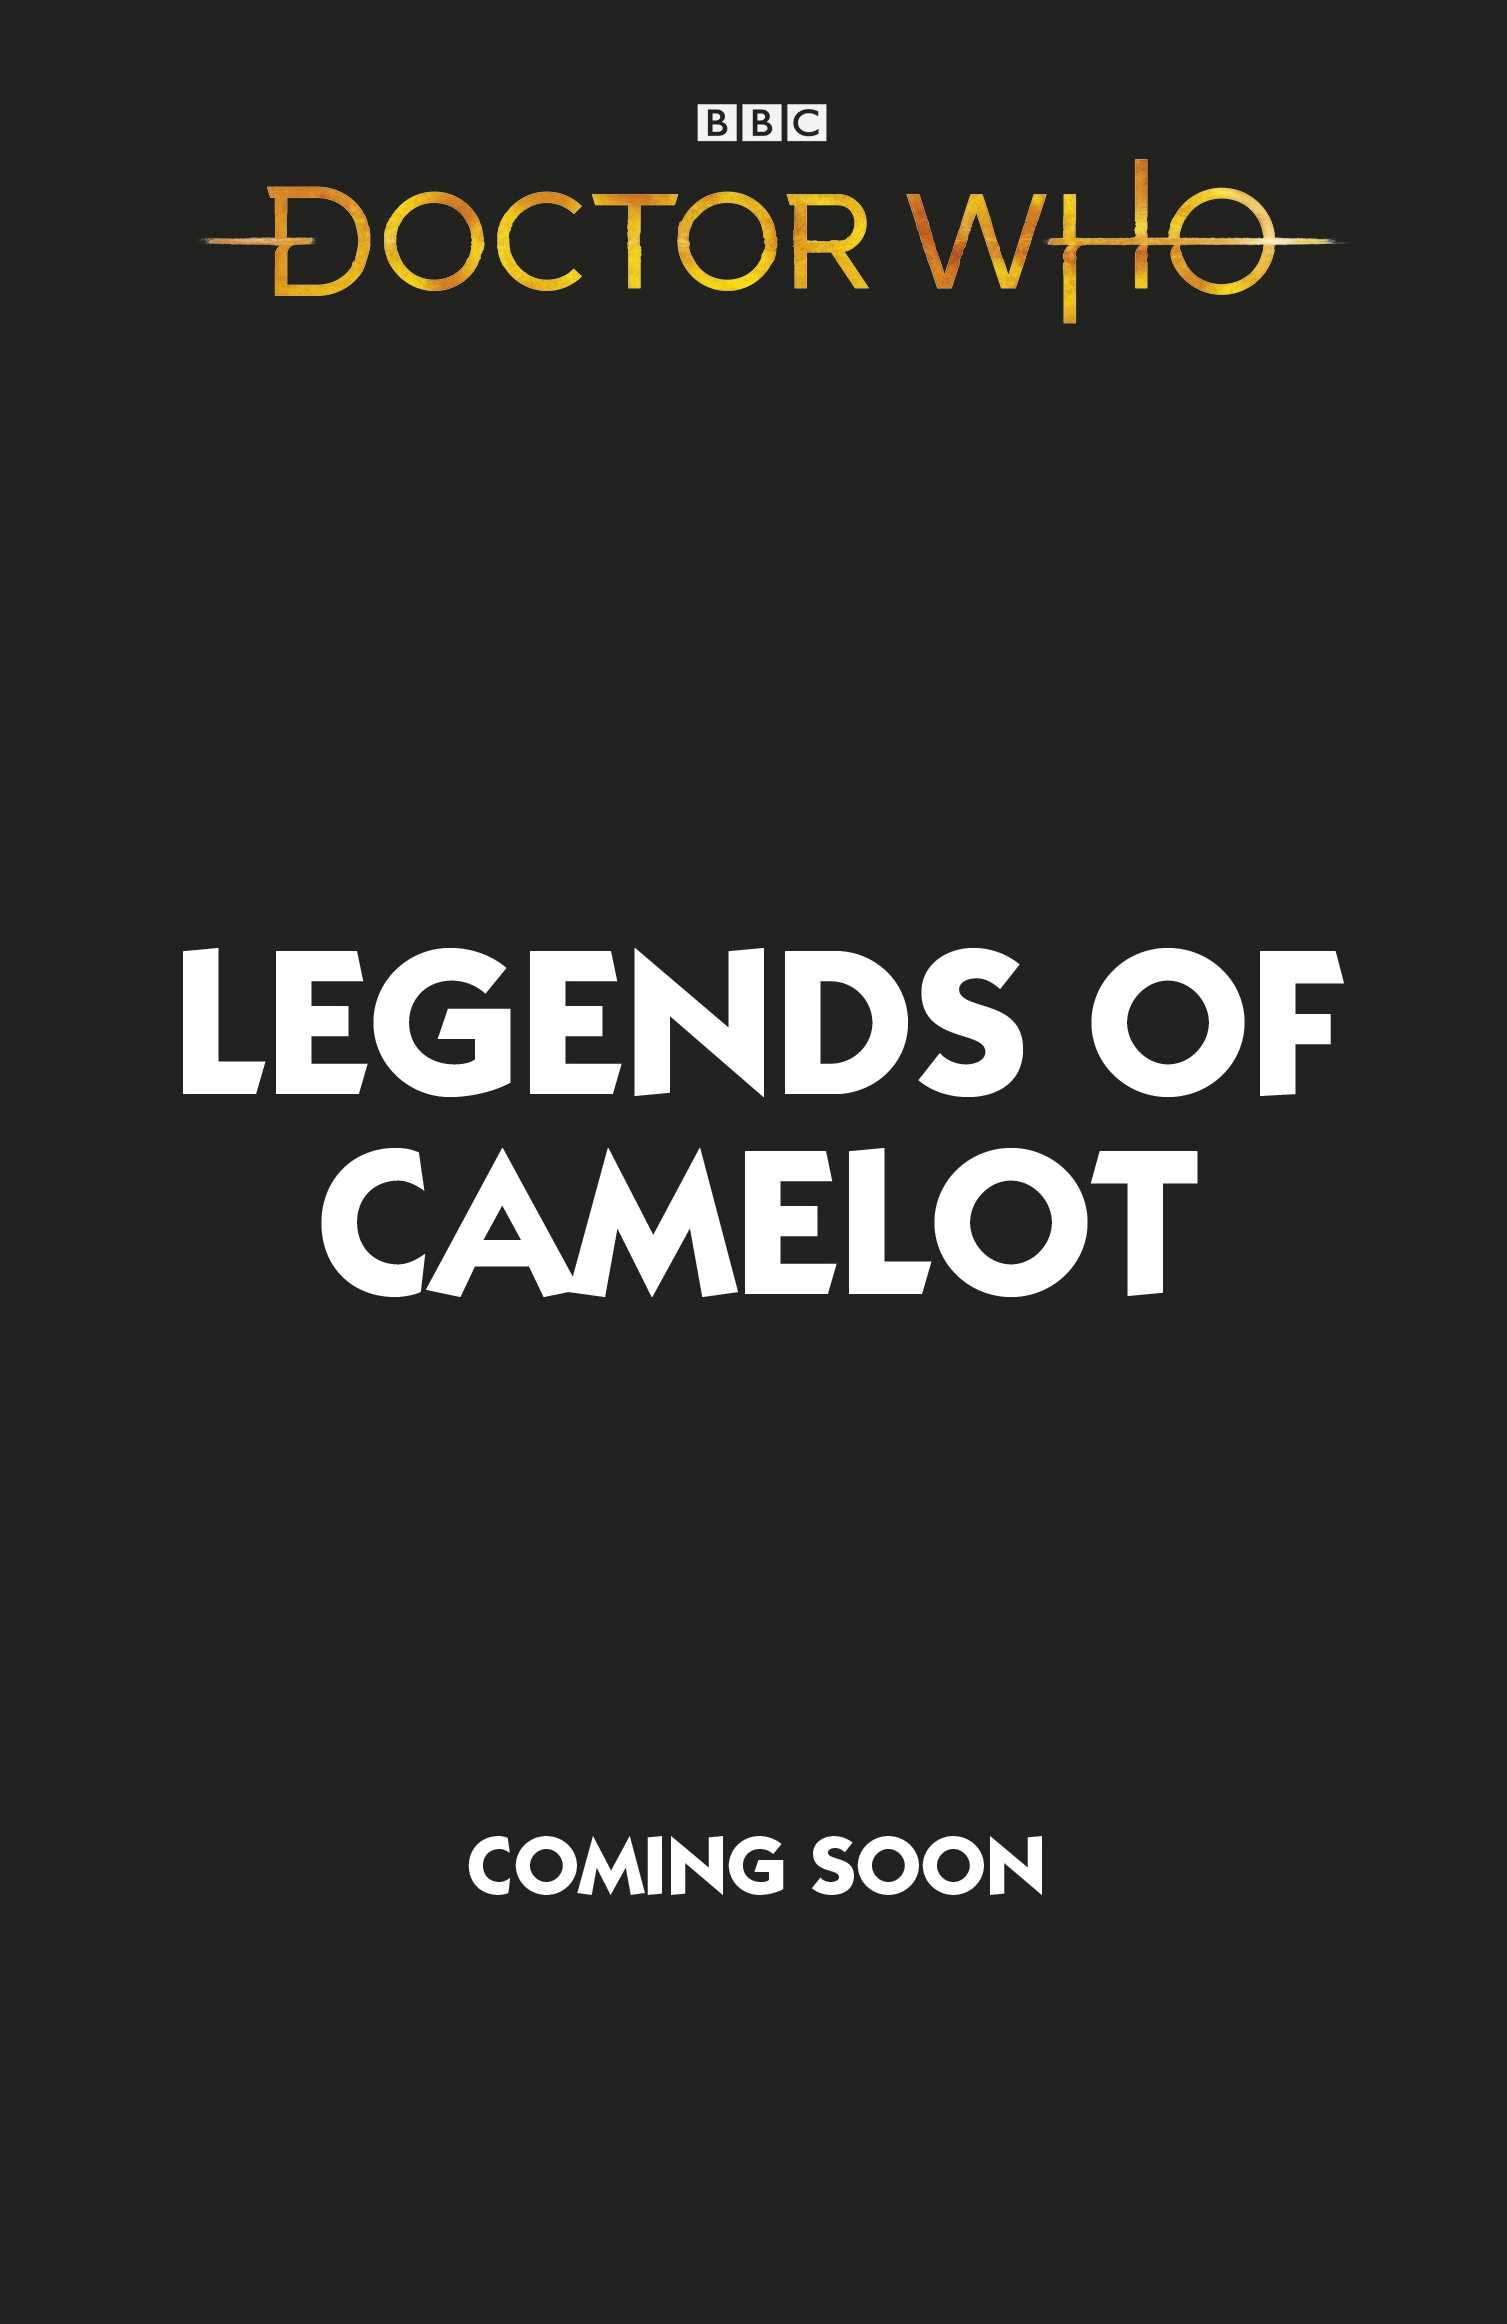 Legends of Camelot (Doctor Who)